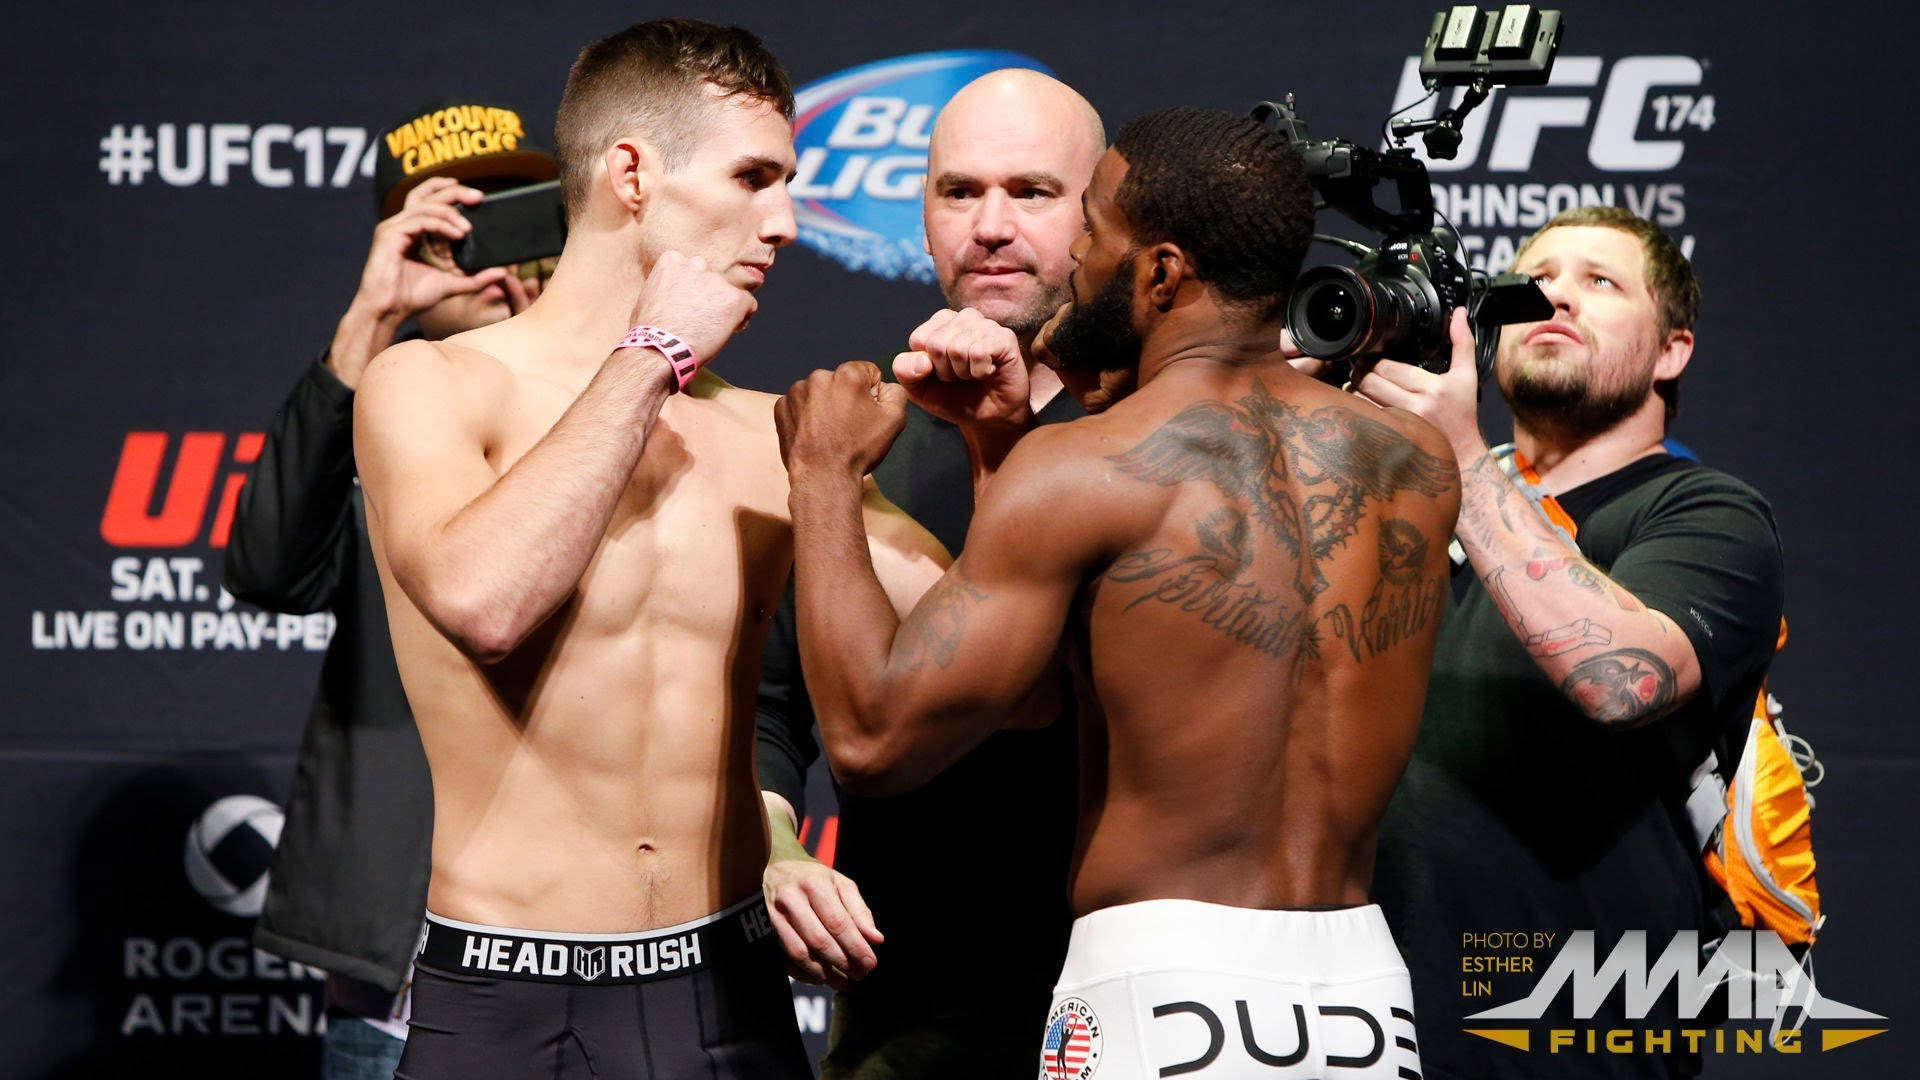 Tyron Woodley Against Rory Macdonald Wallpaper